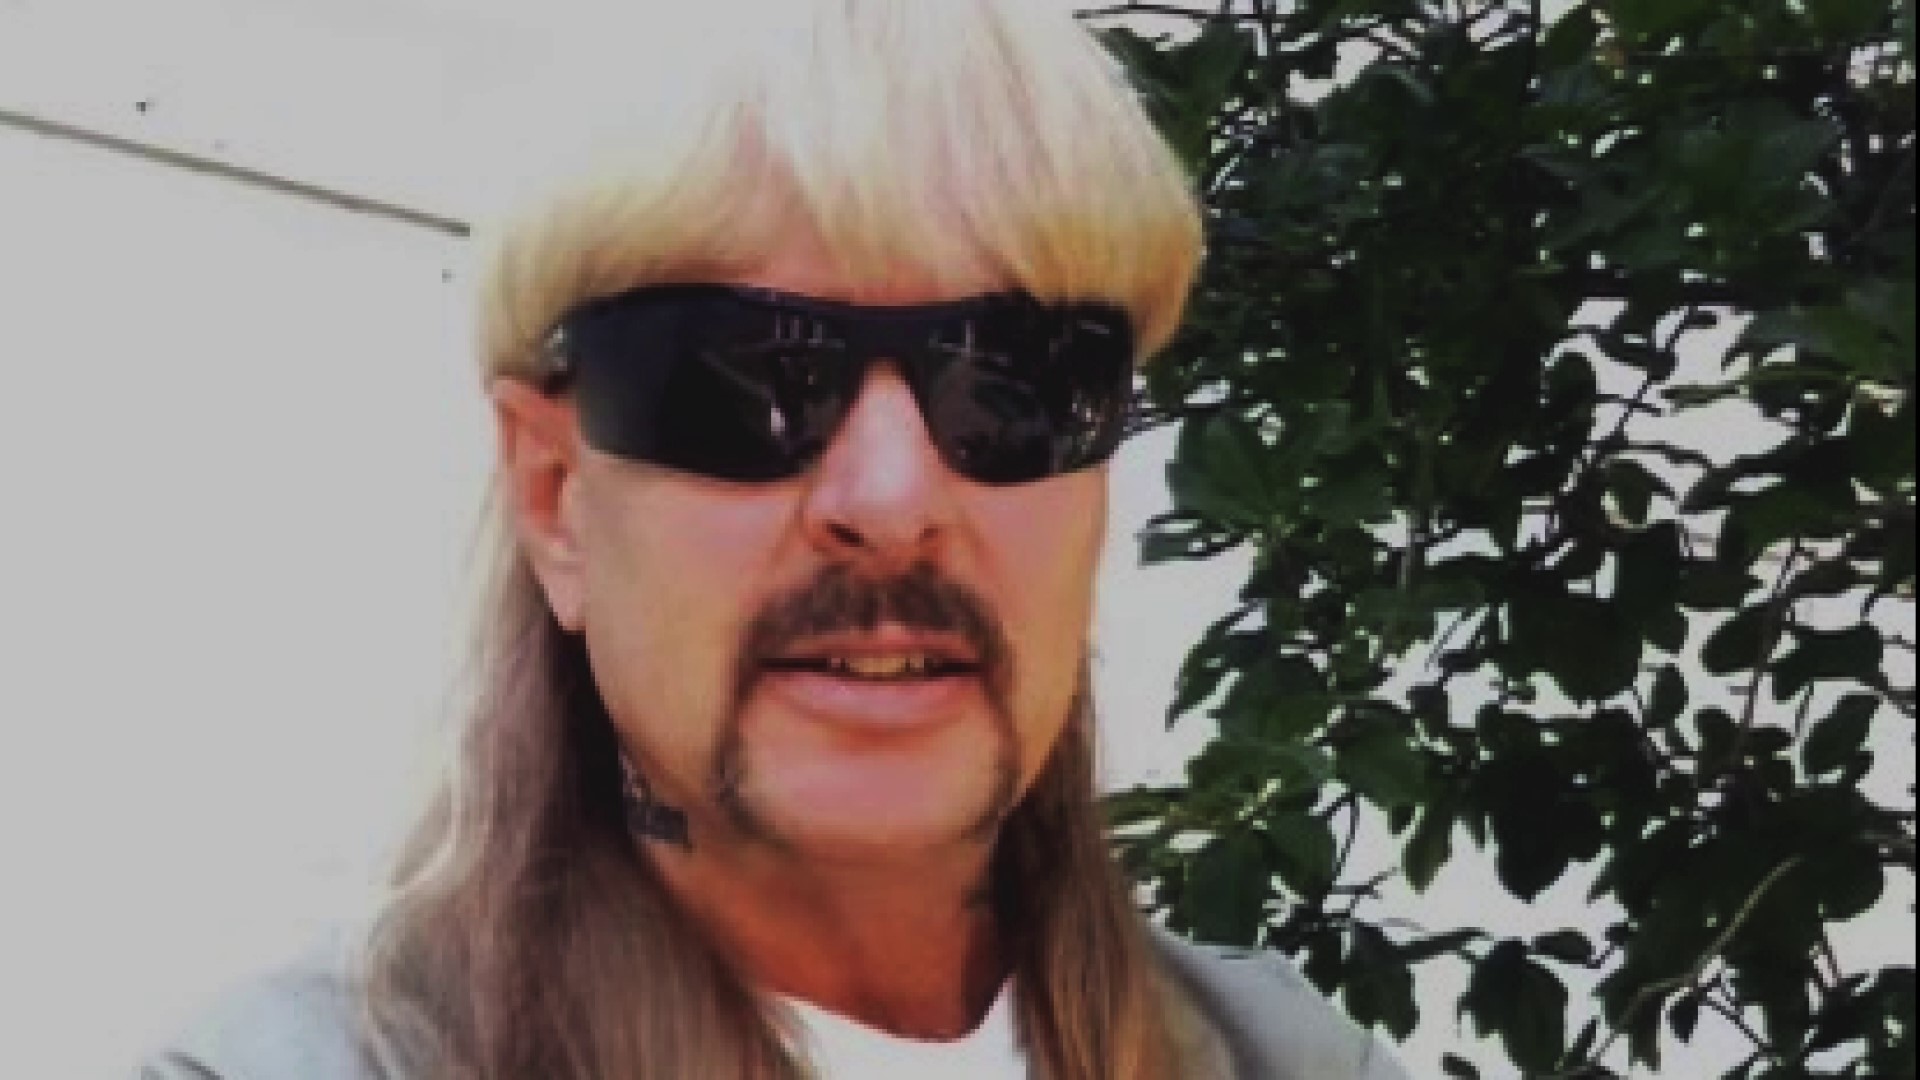 Joe Exotic rose to fame in 2020 with the Netflix documentary "Tiger King." Now behind bars, he says if he gets pardoned, he plans on settling down in Fort Smith.